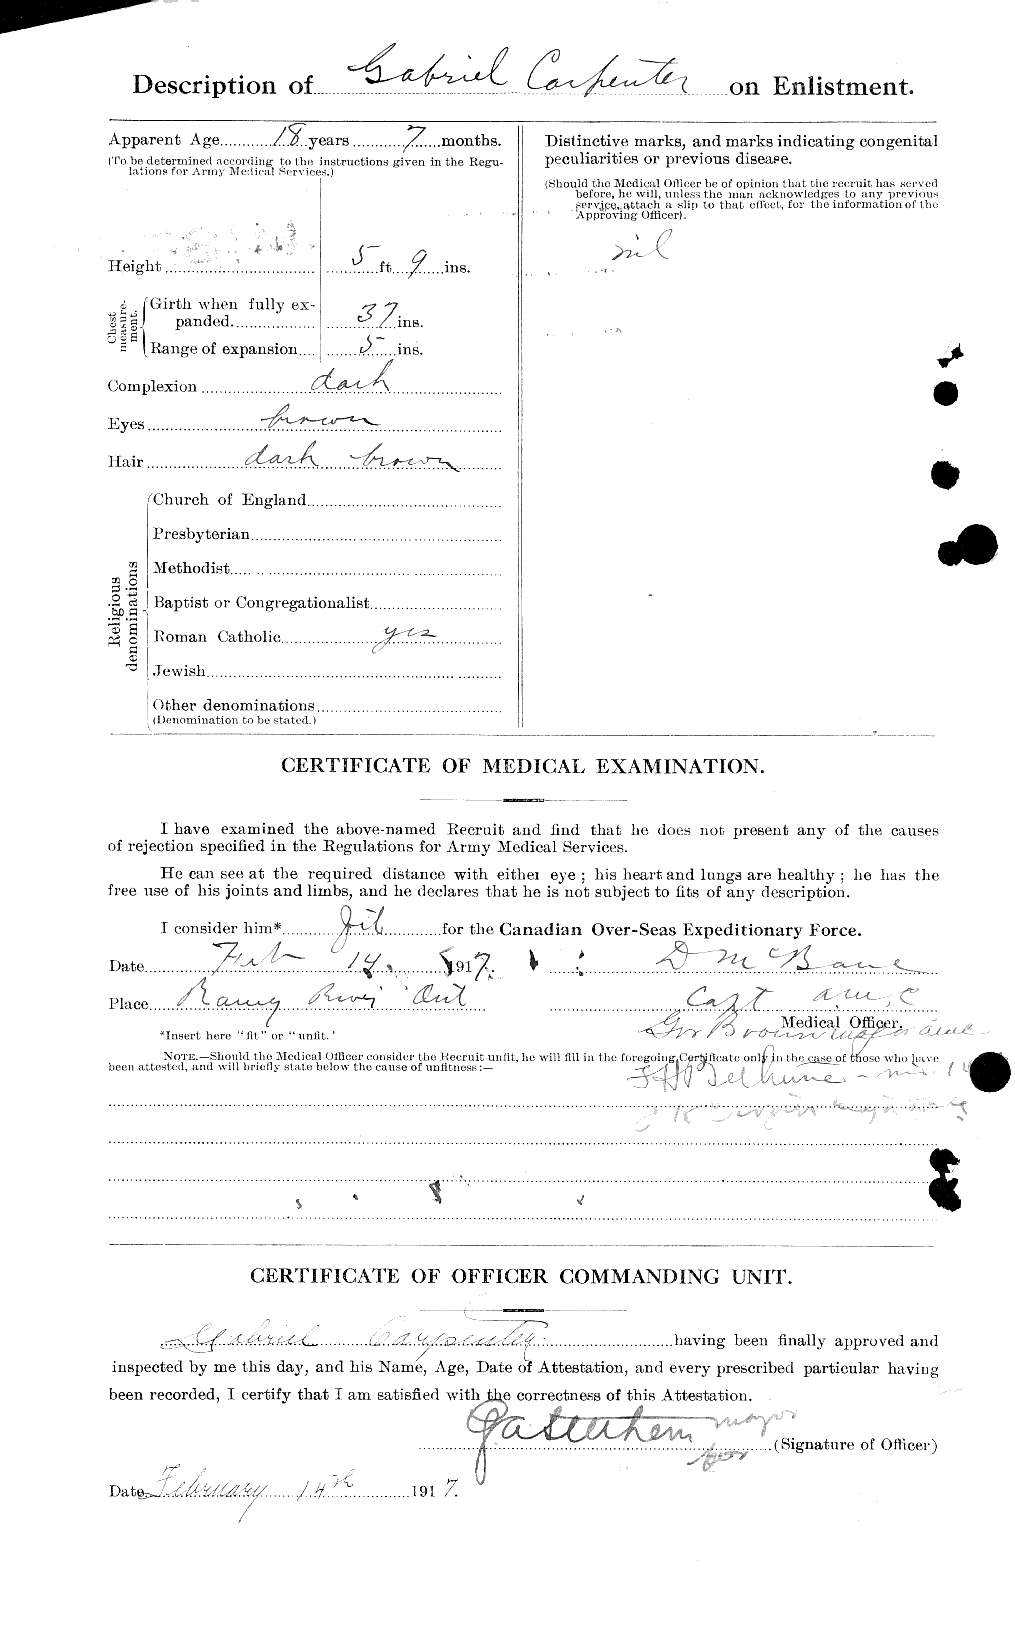 Personnel Records of the First World War - CEF 005258b